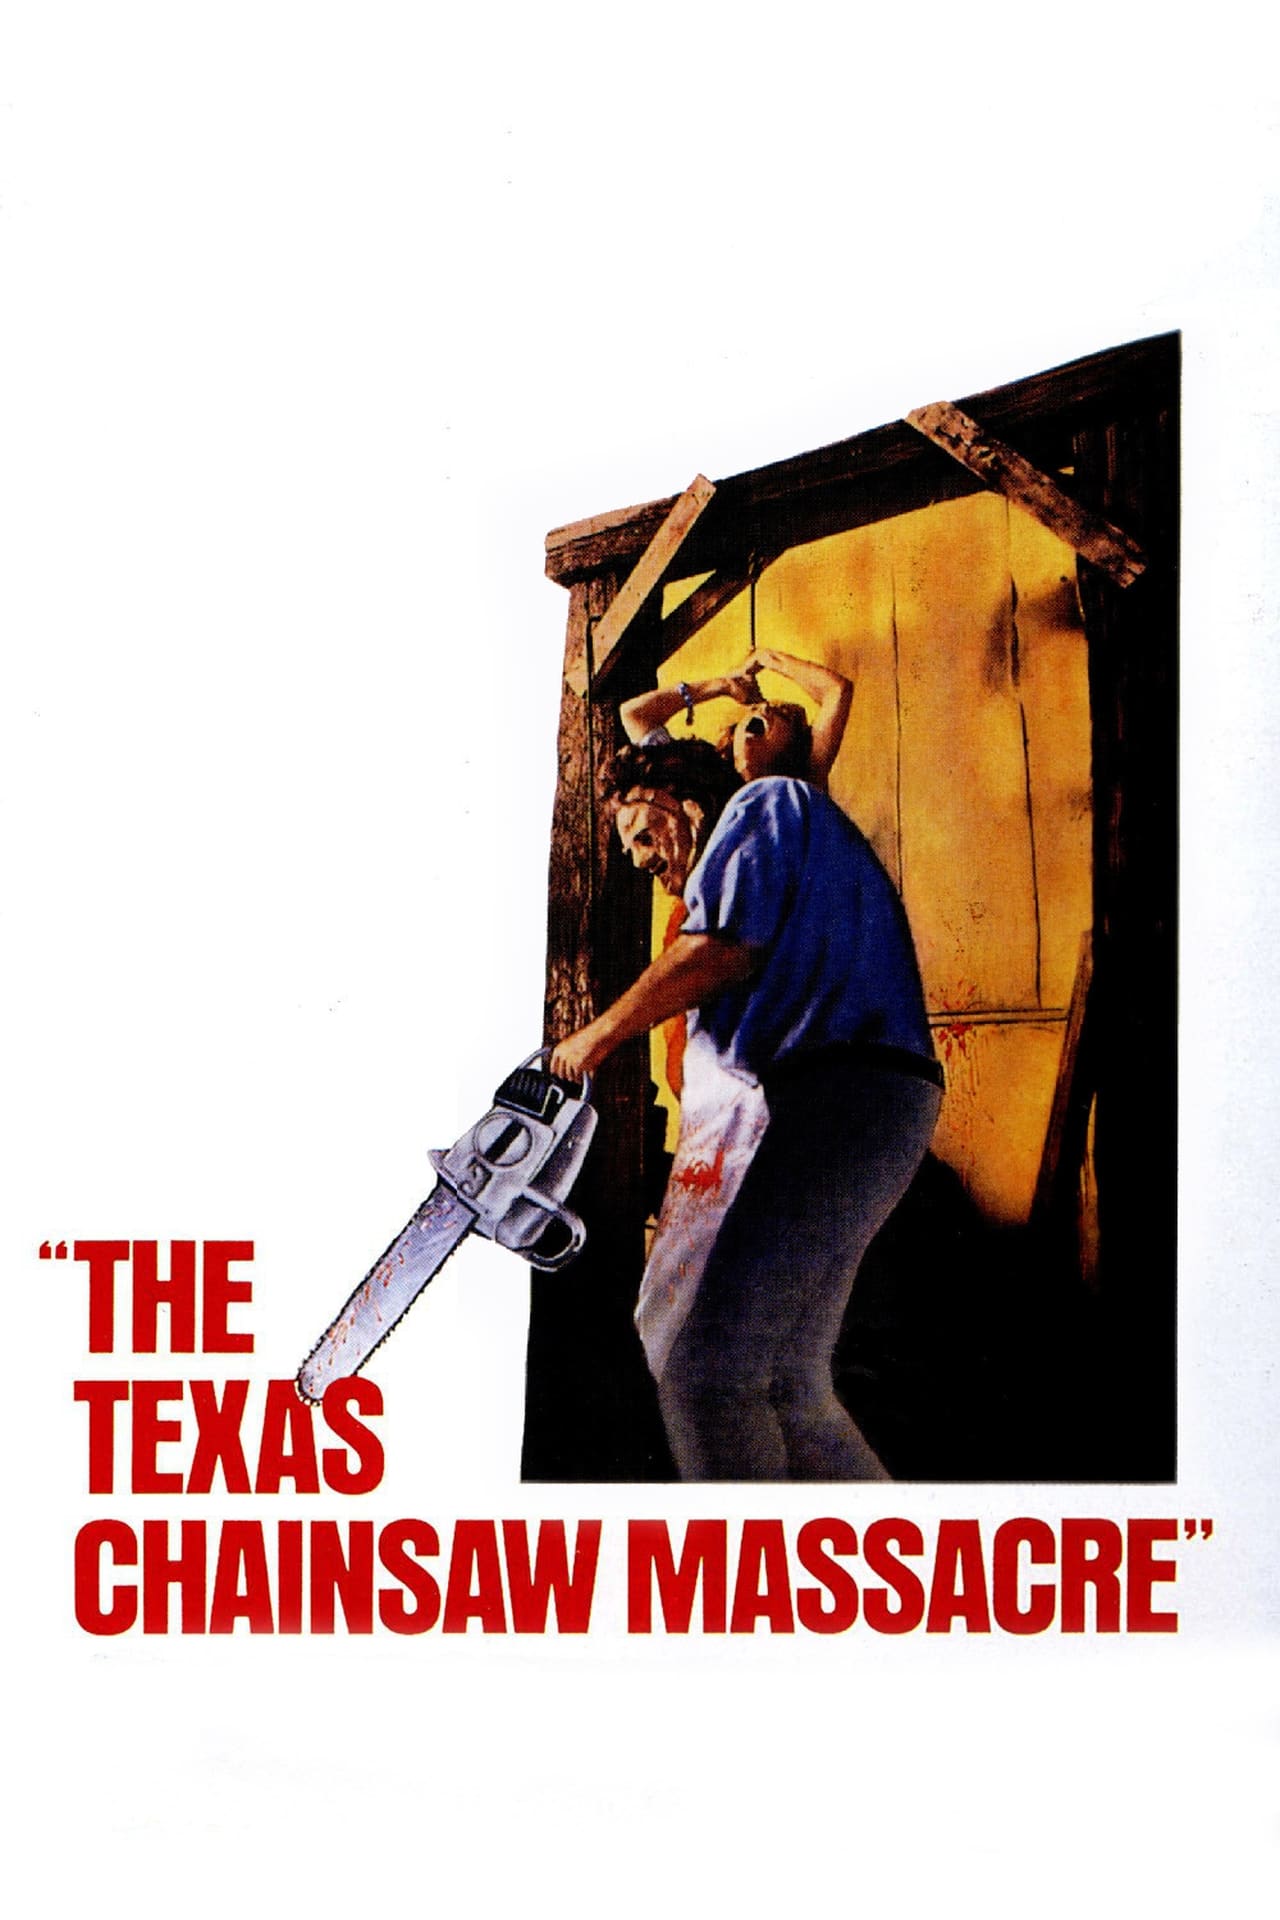 The Texas Chain Saw Massacre (1974) poster